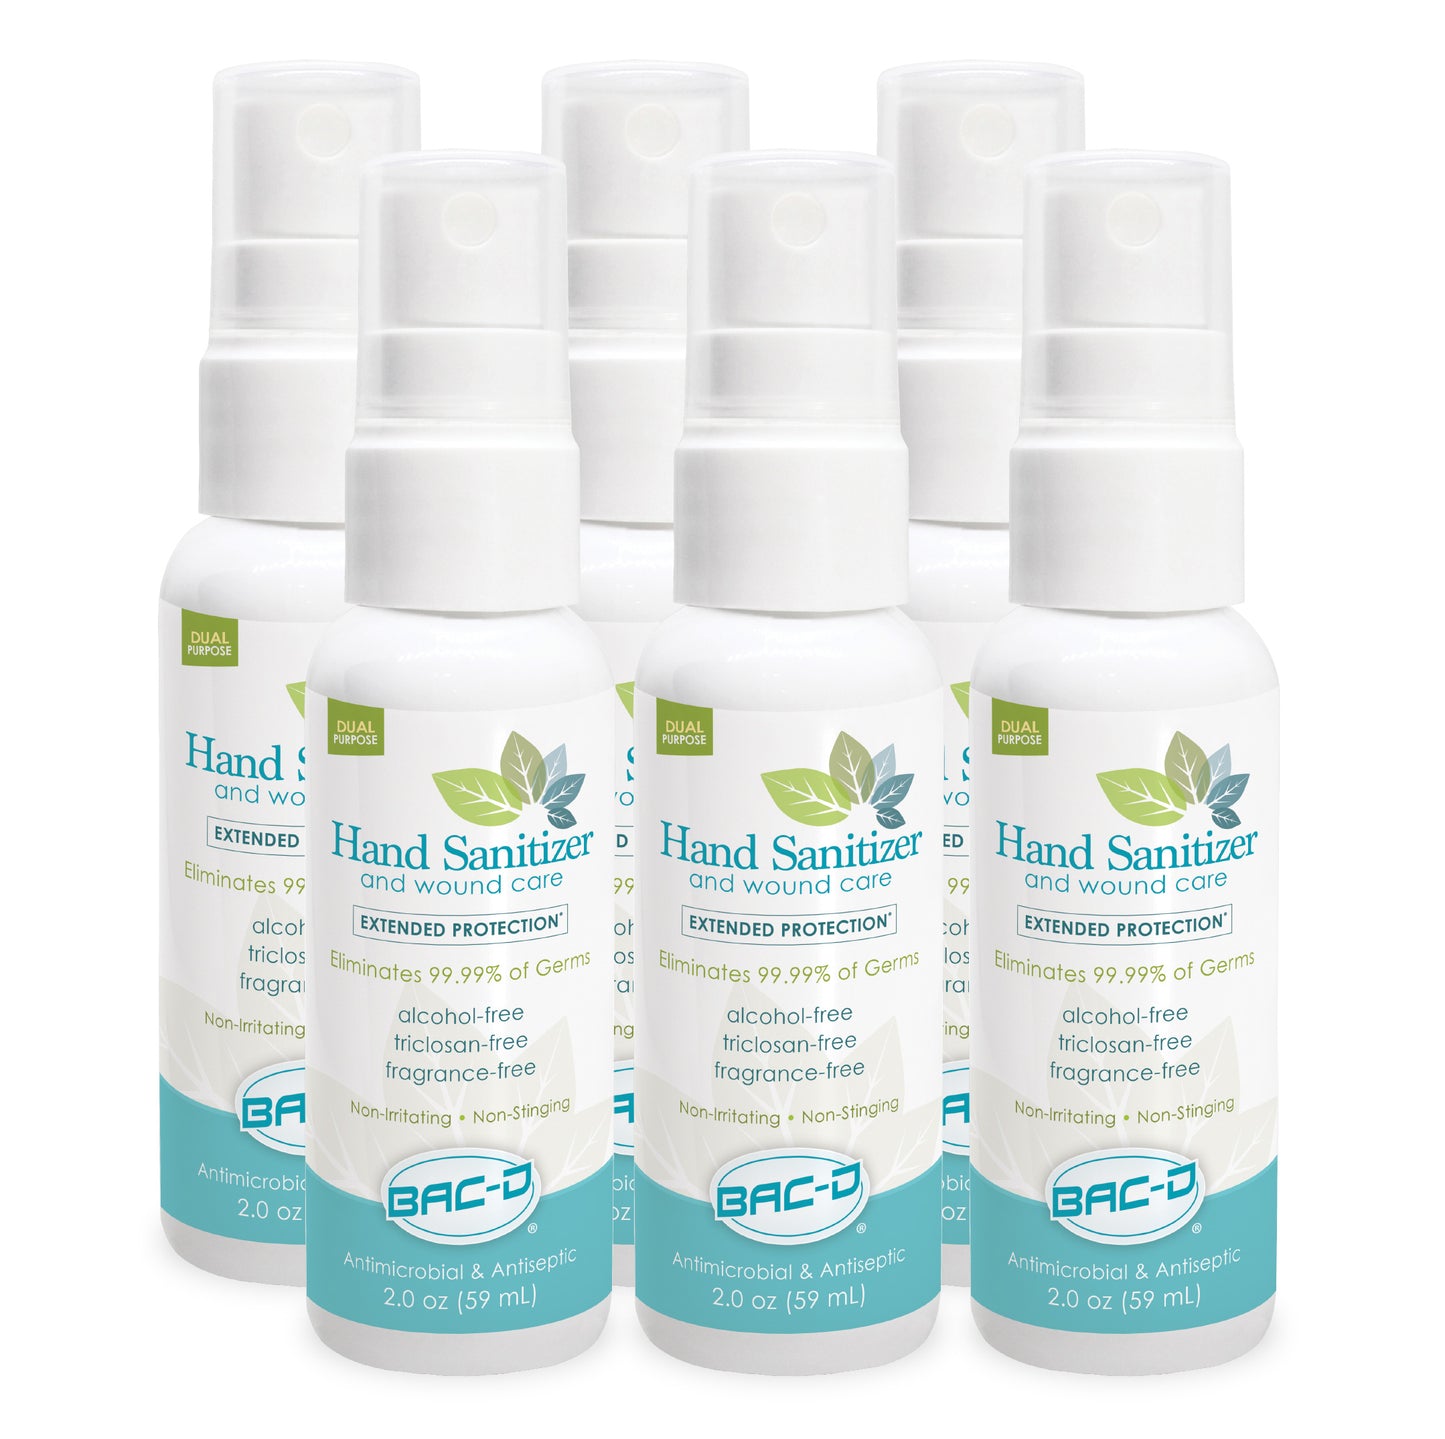 BAC-D® 2oz Spray Alcohol Free Hand Sanitizer & Wound Care - 6 Pack